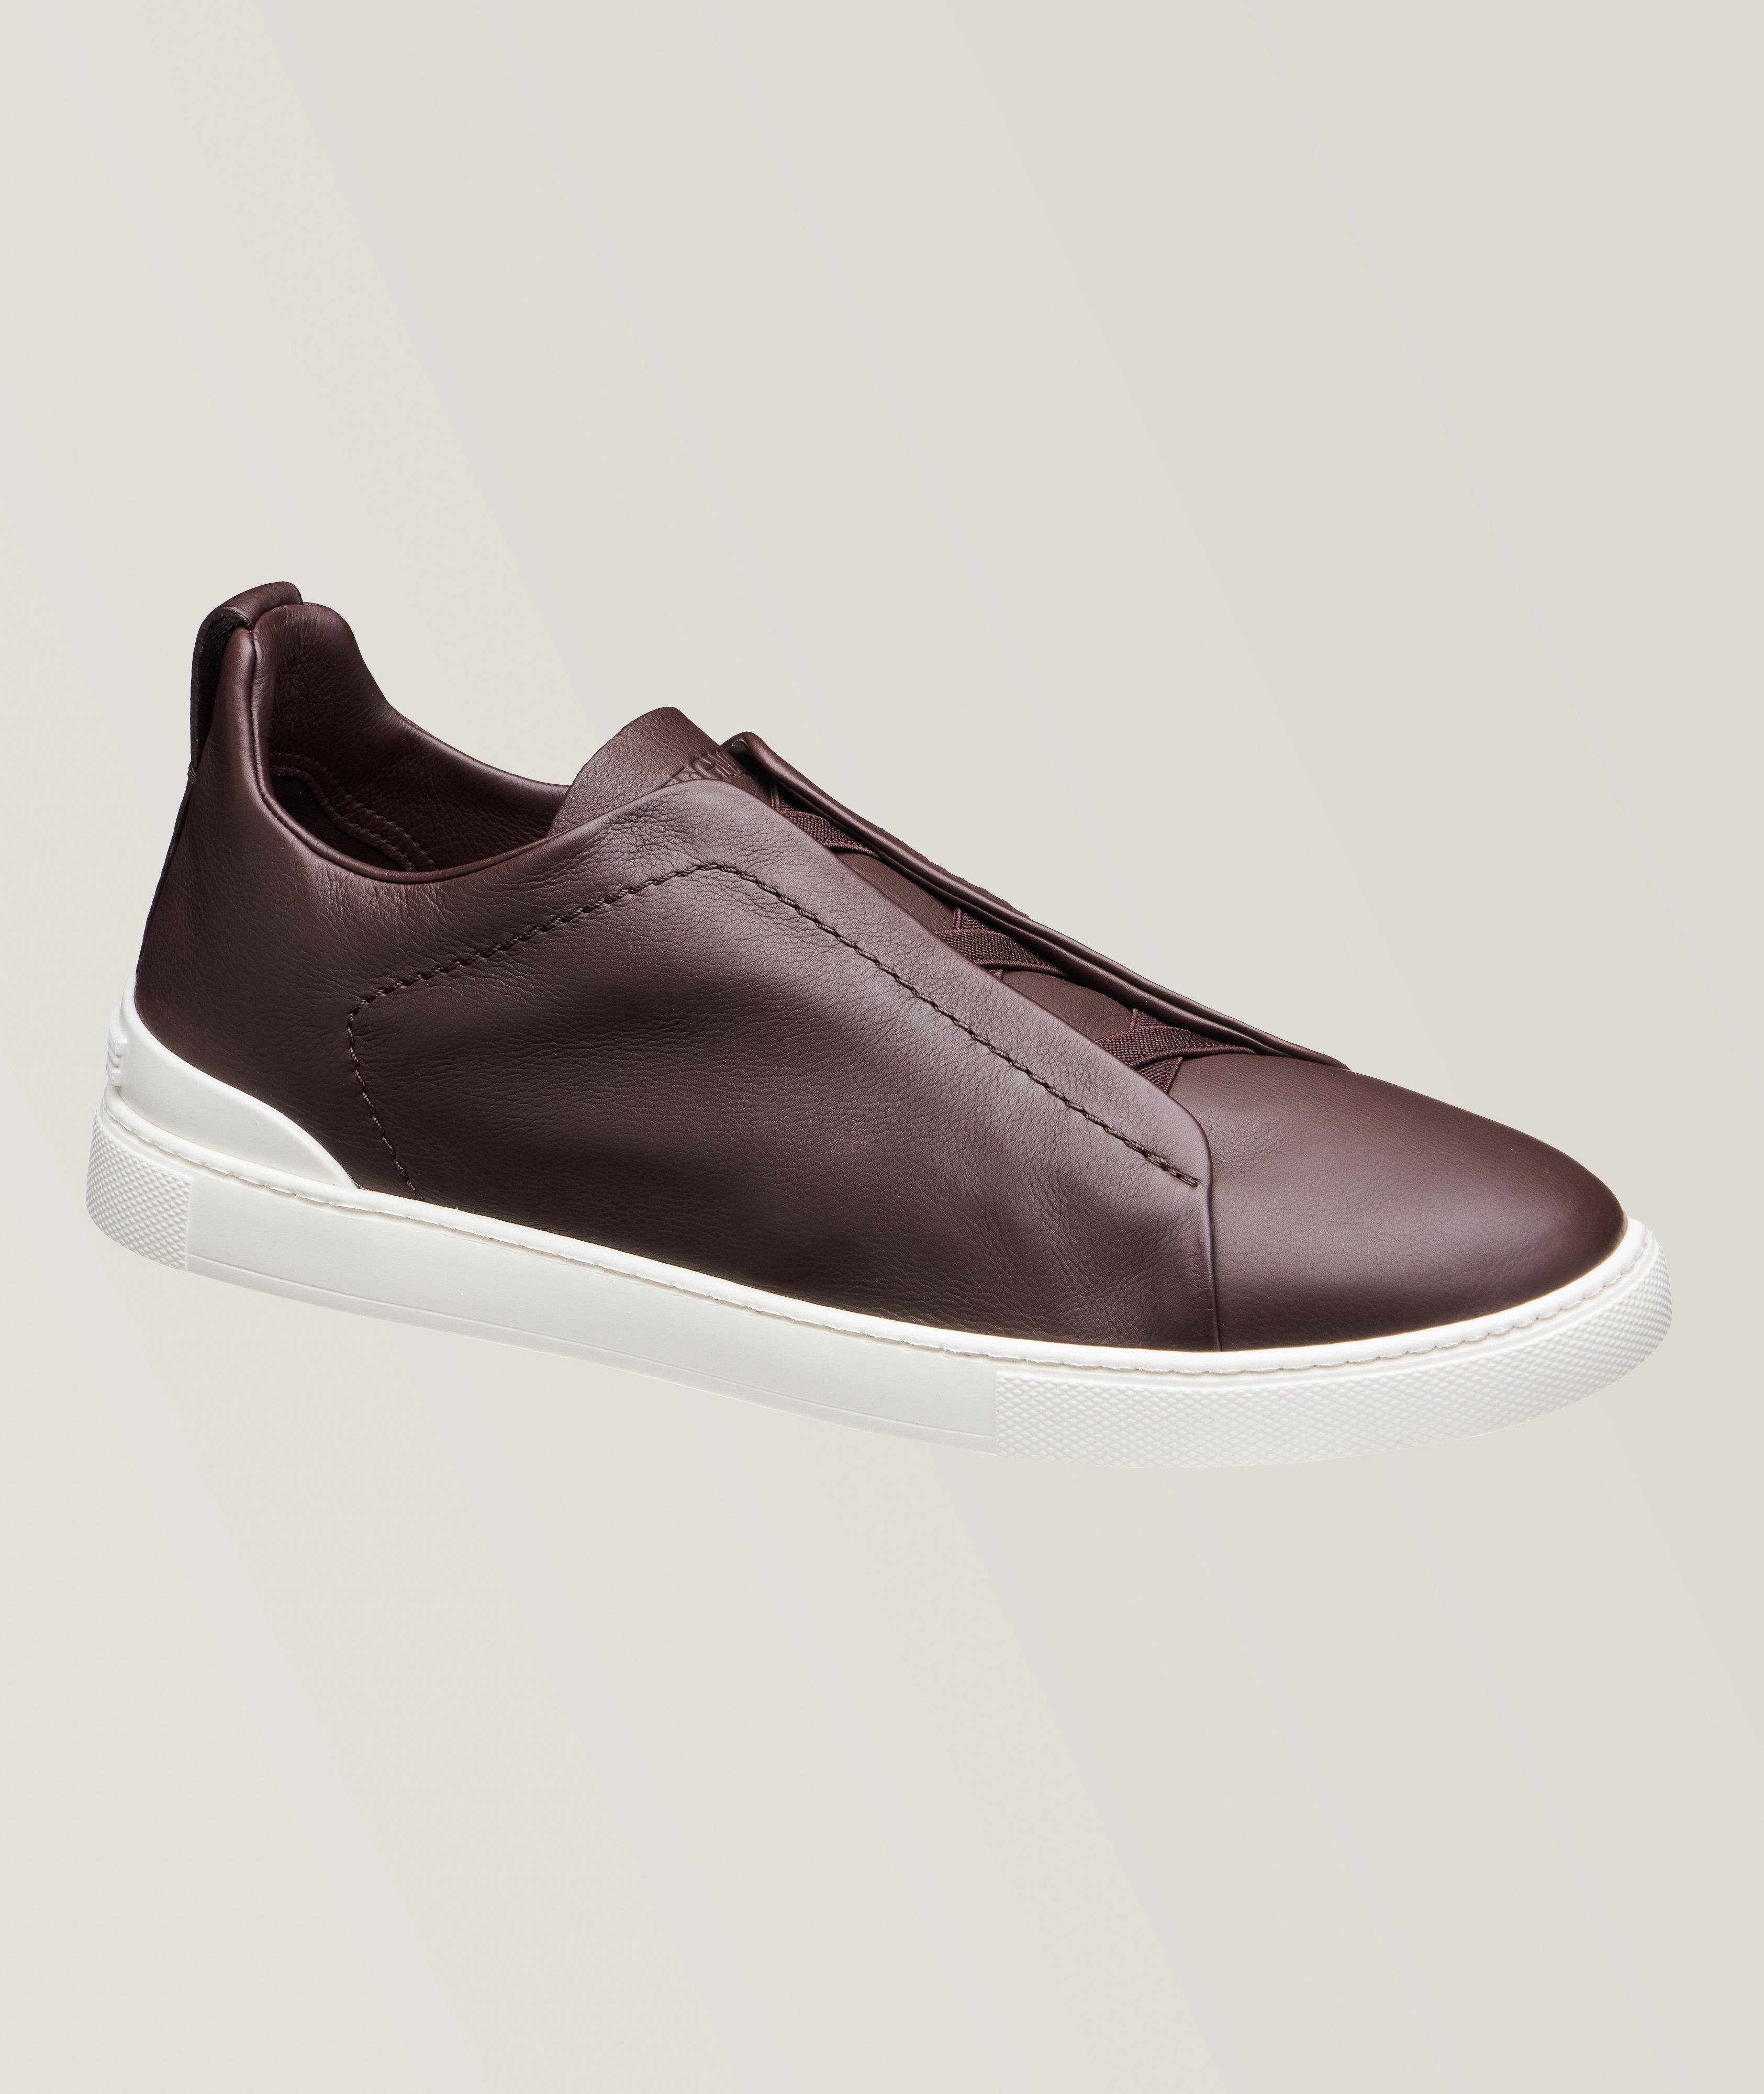 Triple Stitch Cashmere Leather Sneakers image 0